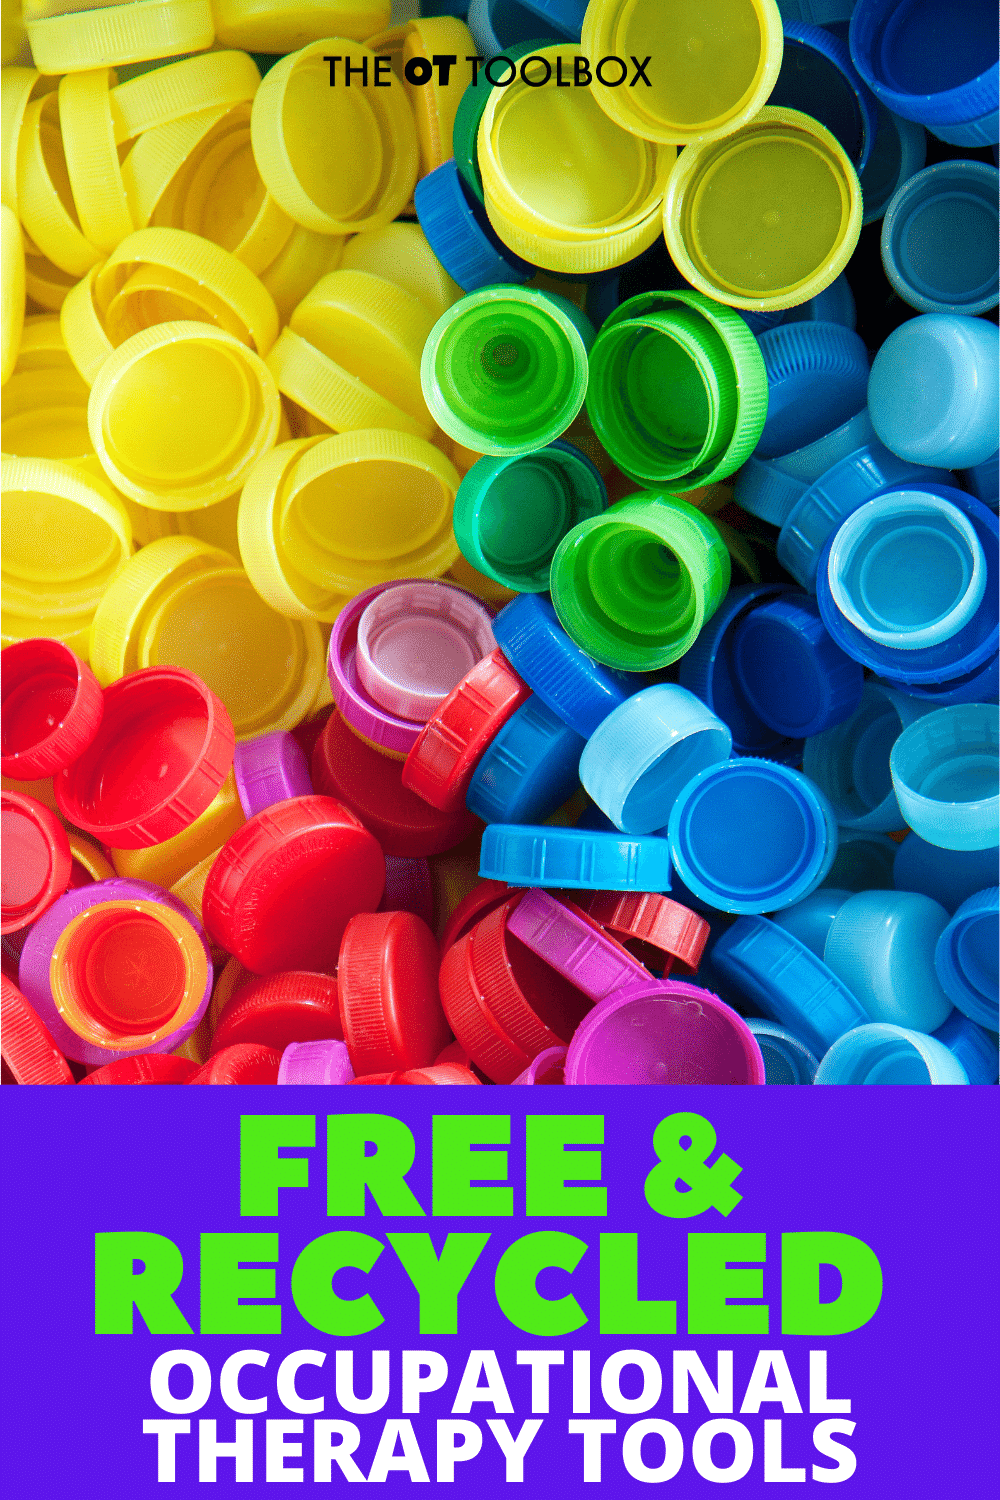 Use these free and recycled items to work on occupational therapy goals